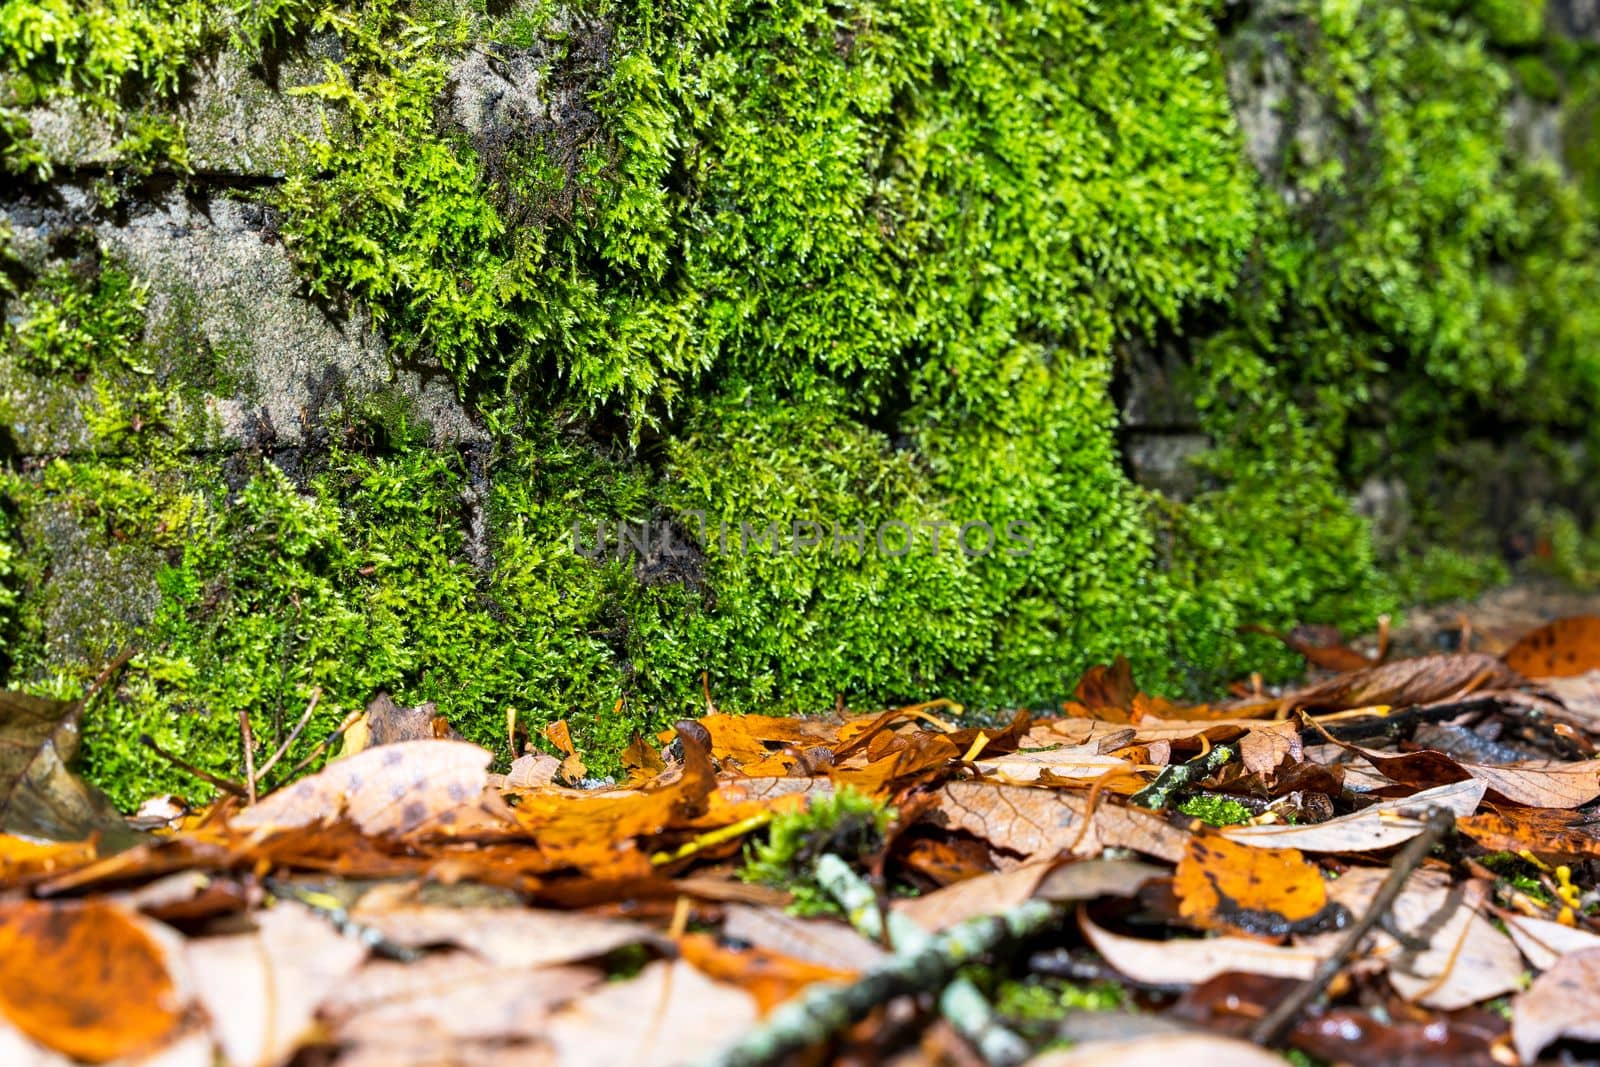  Dry fallen leaves and overgrown green moss  by audiznam2609